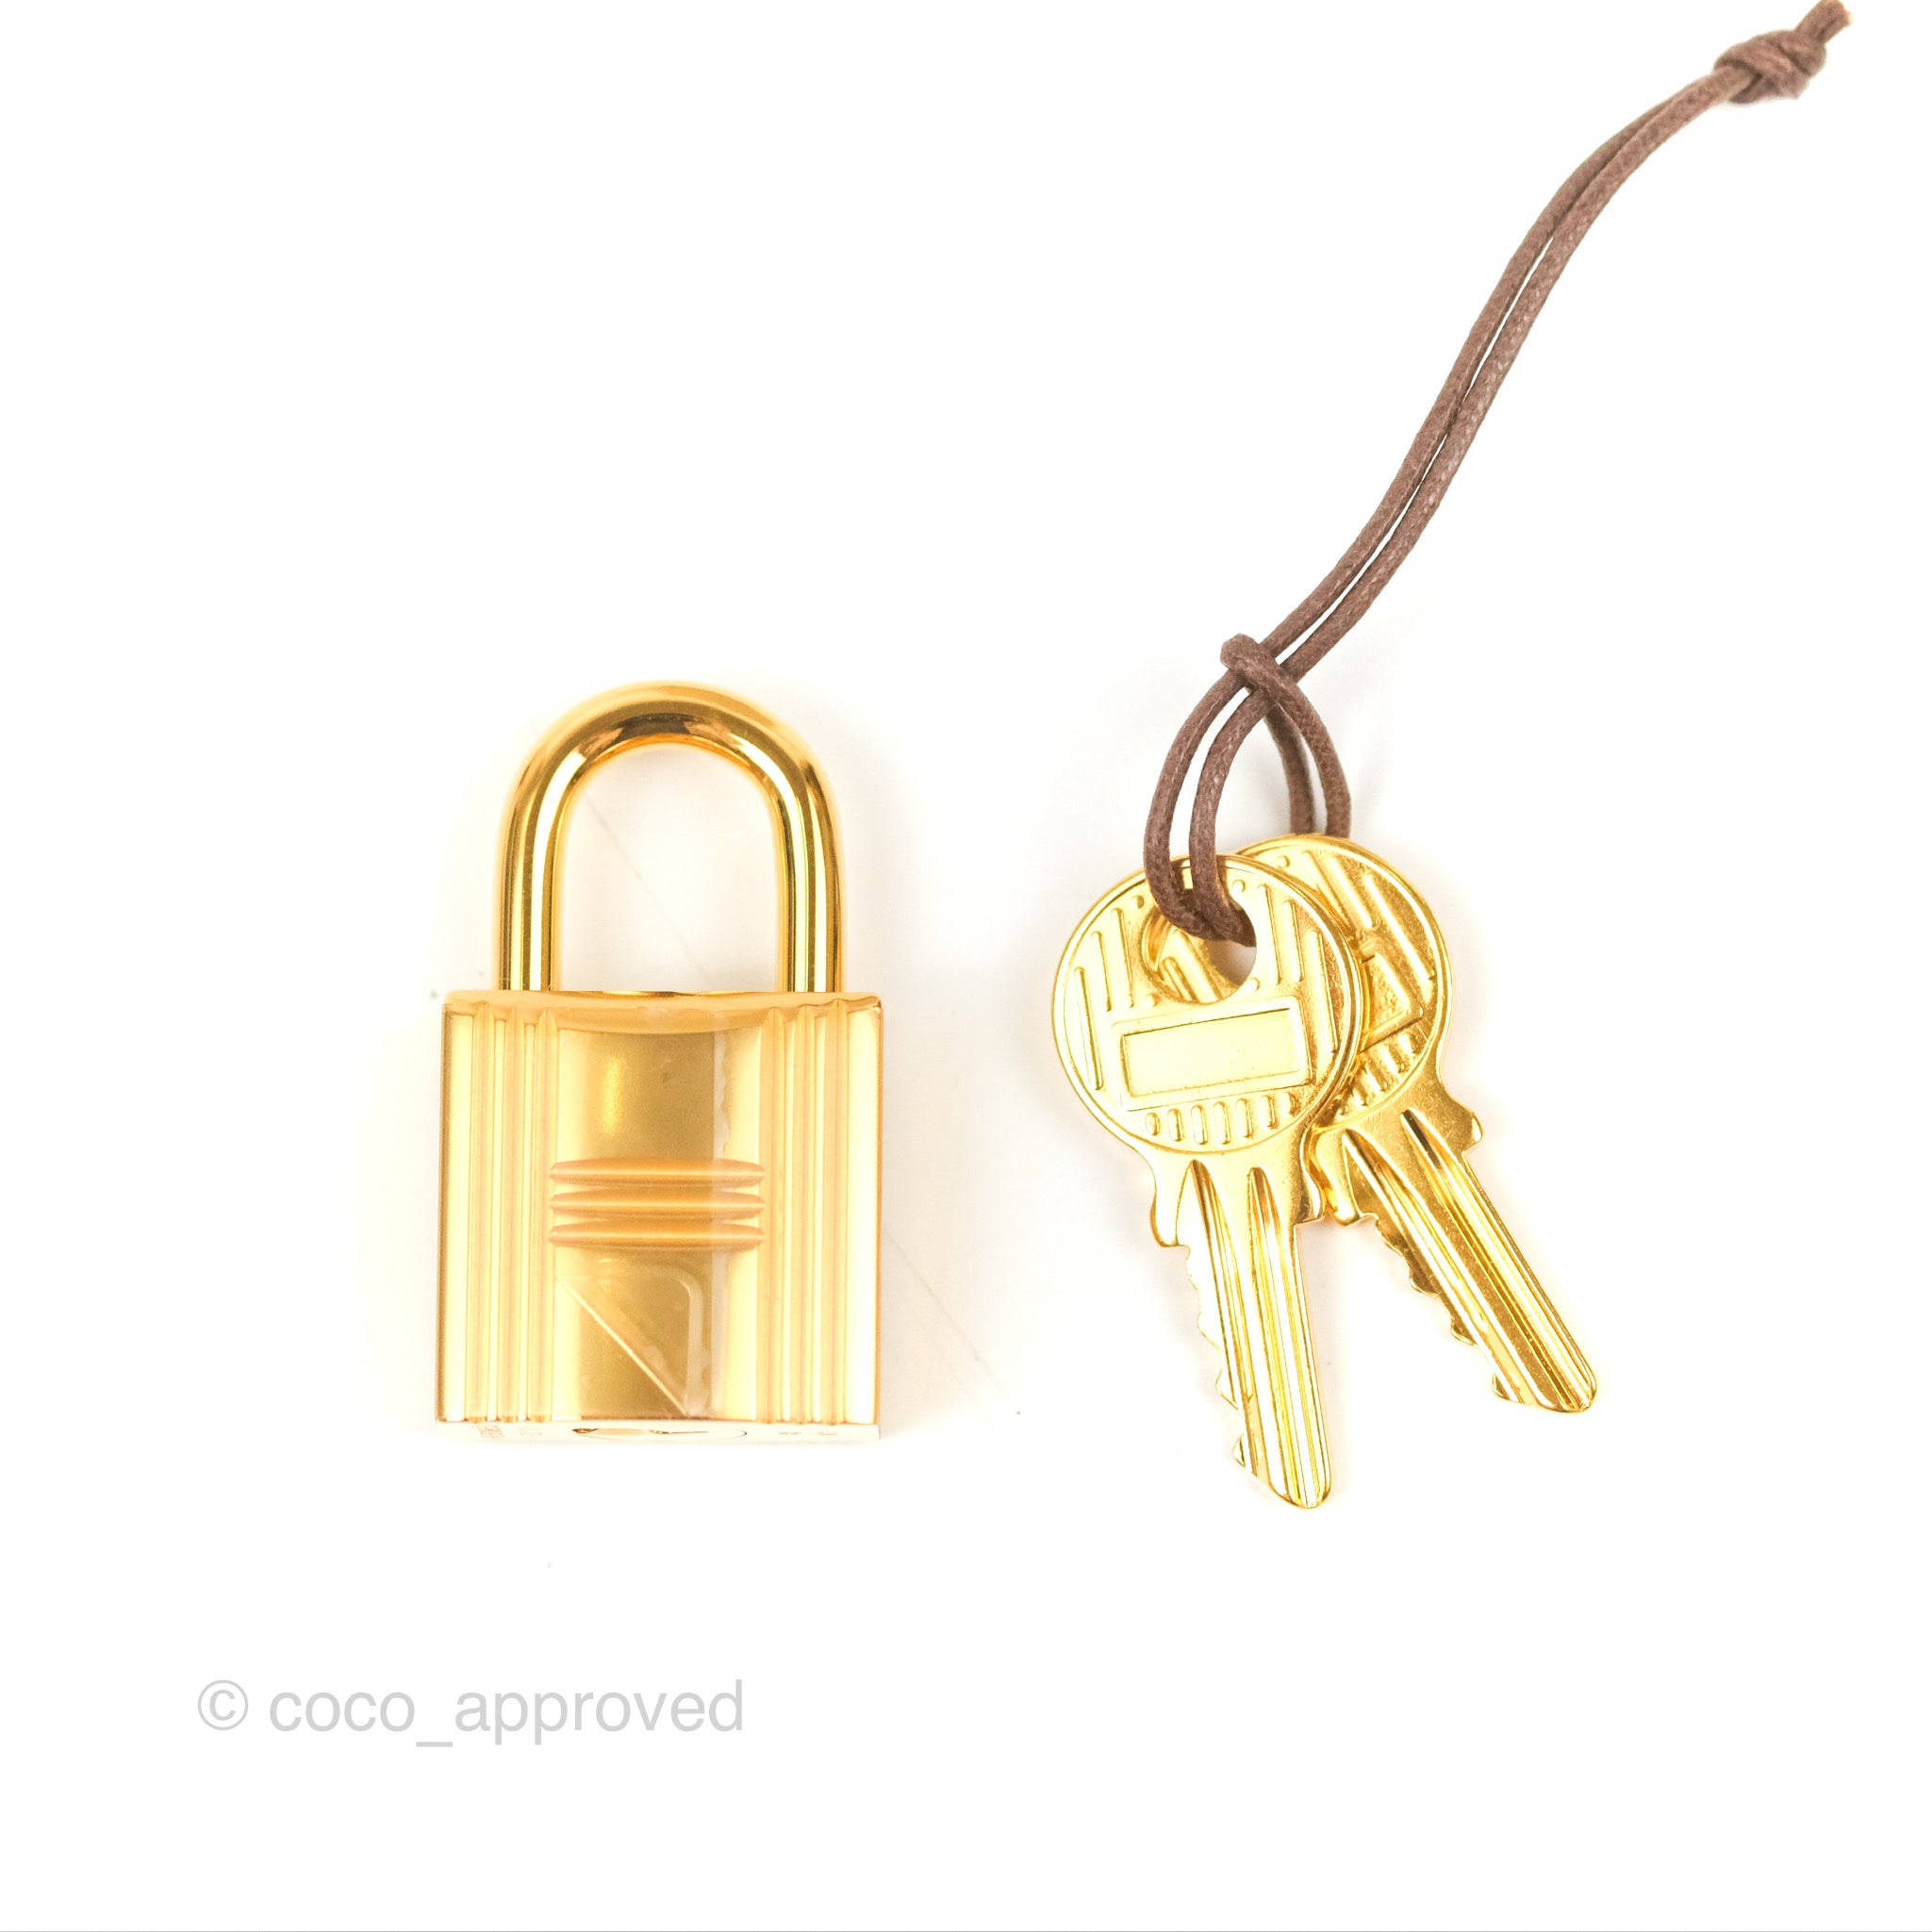 SOLD PENDING Picotin Lock 18 Craie Taurillon Clemence Gold Hardware  ———————————————————————⁣⁣ Price including worldwide express s